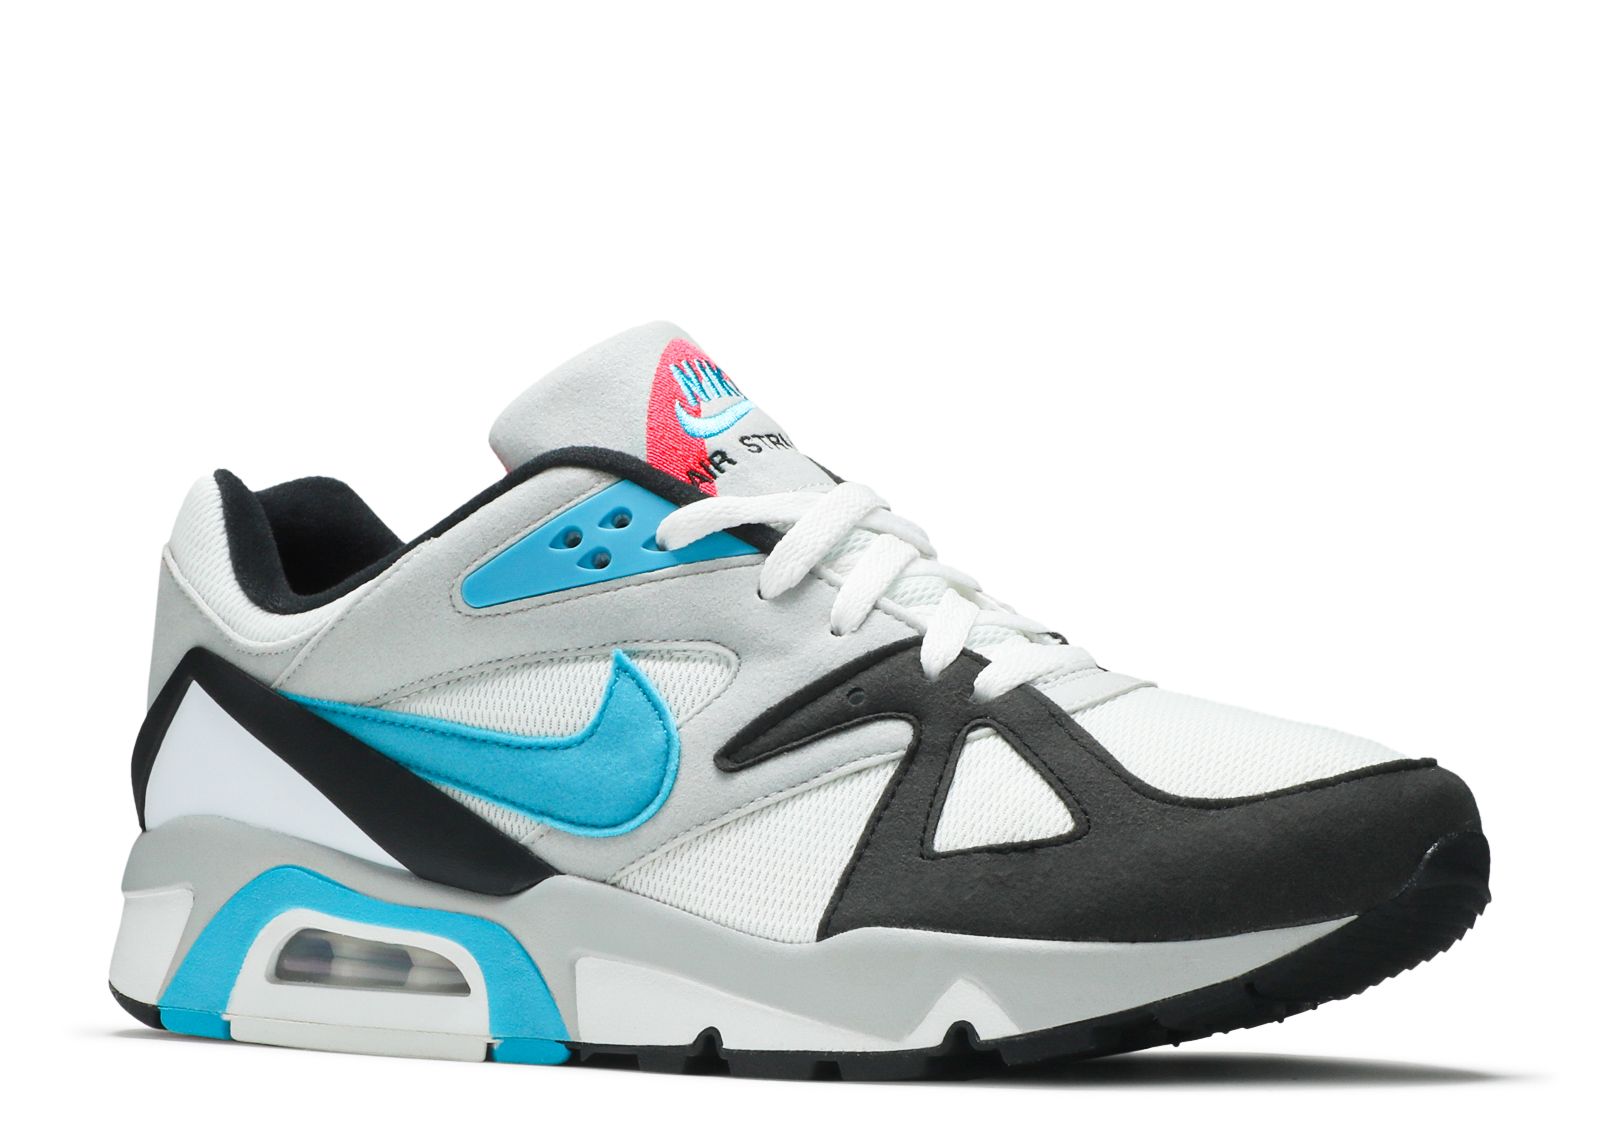 🔴 Nike Air Structure Triax 91 Turquoise White Pink Black Men's 13  2009